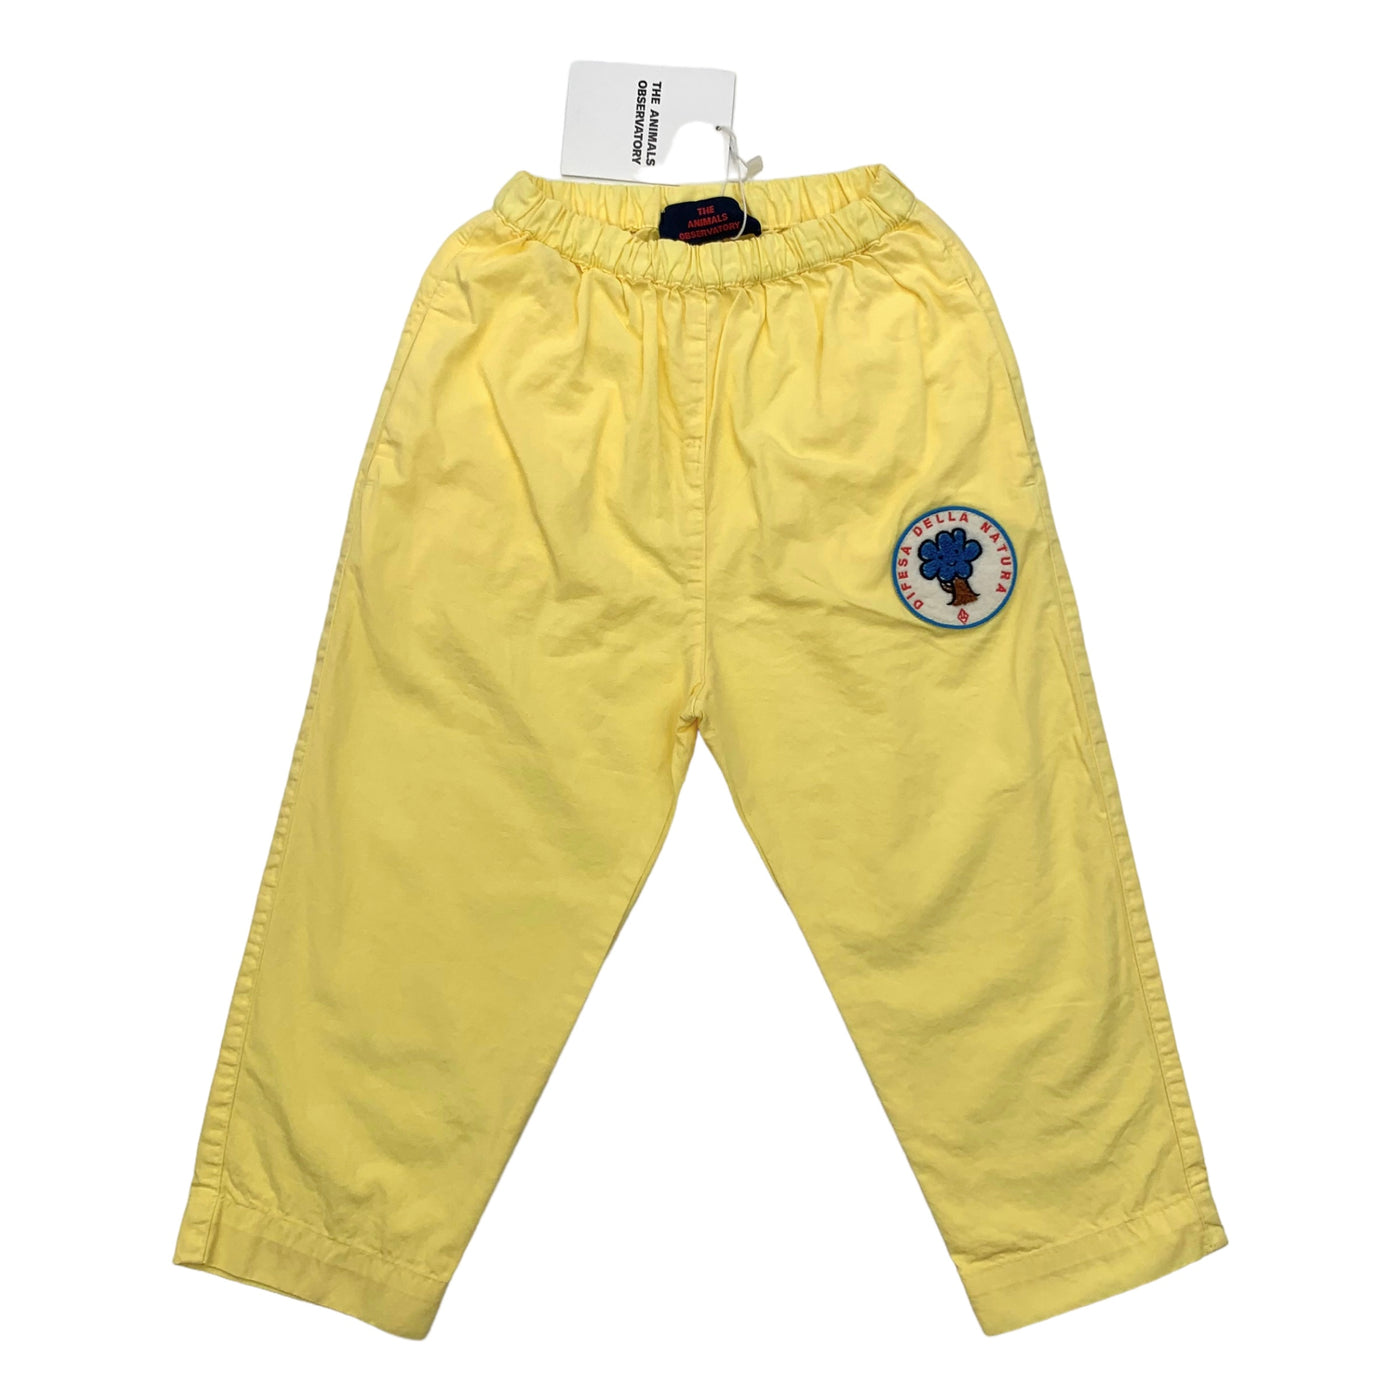 The animals observatory pants yellow size 4 NEW